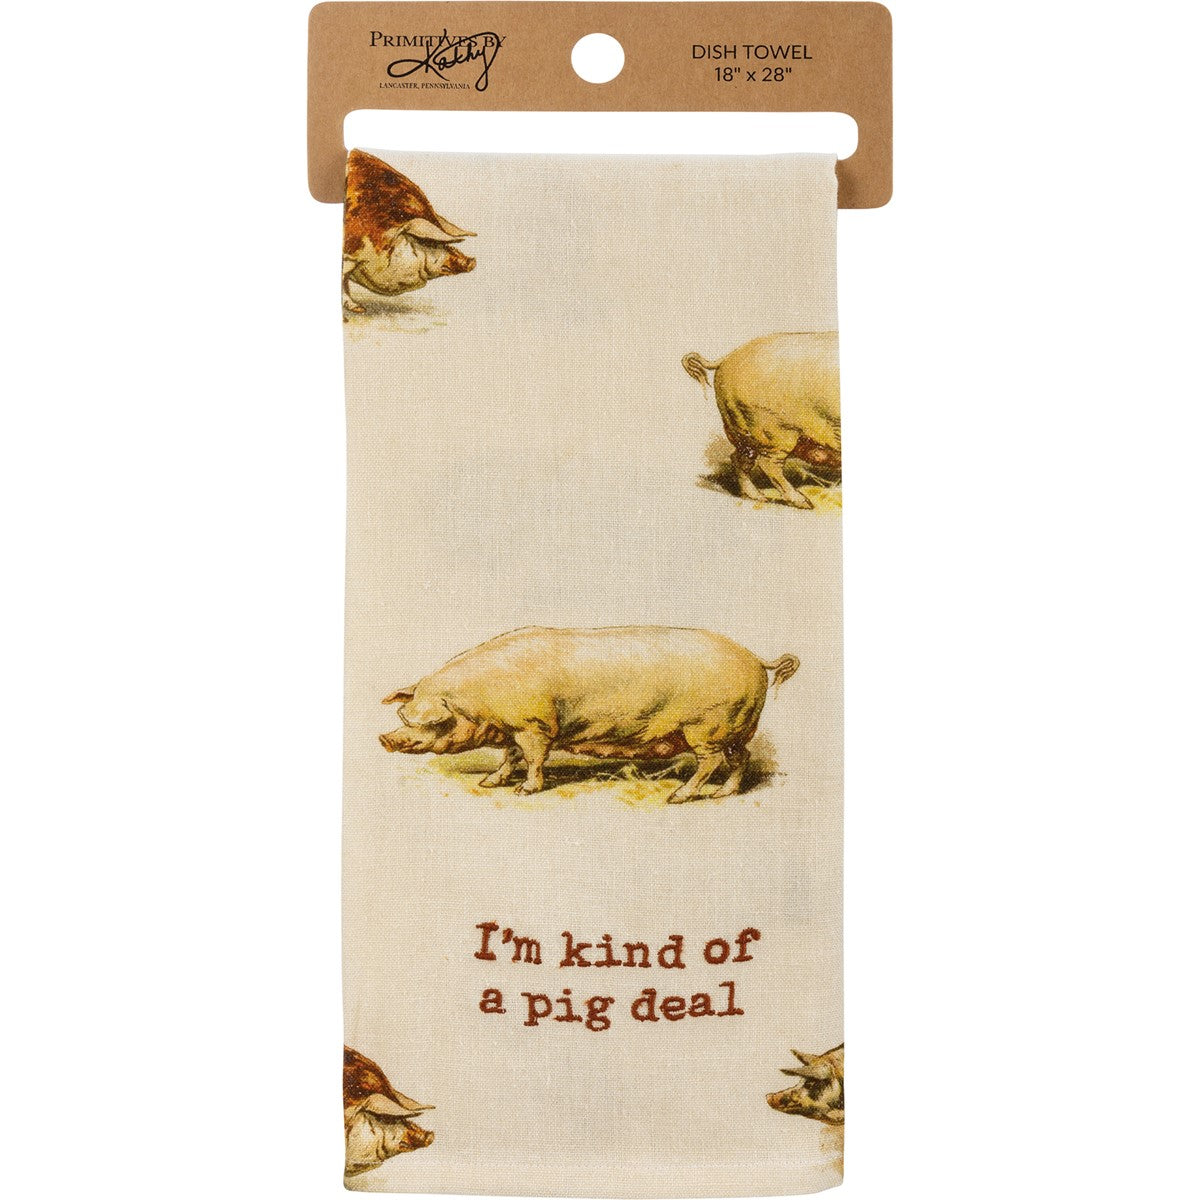 ivory towel with pig graphics and embroidery.